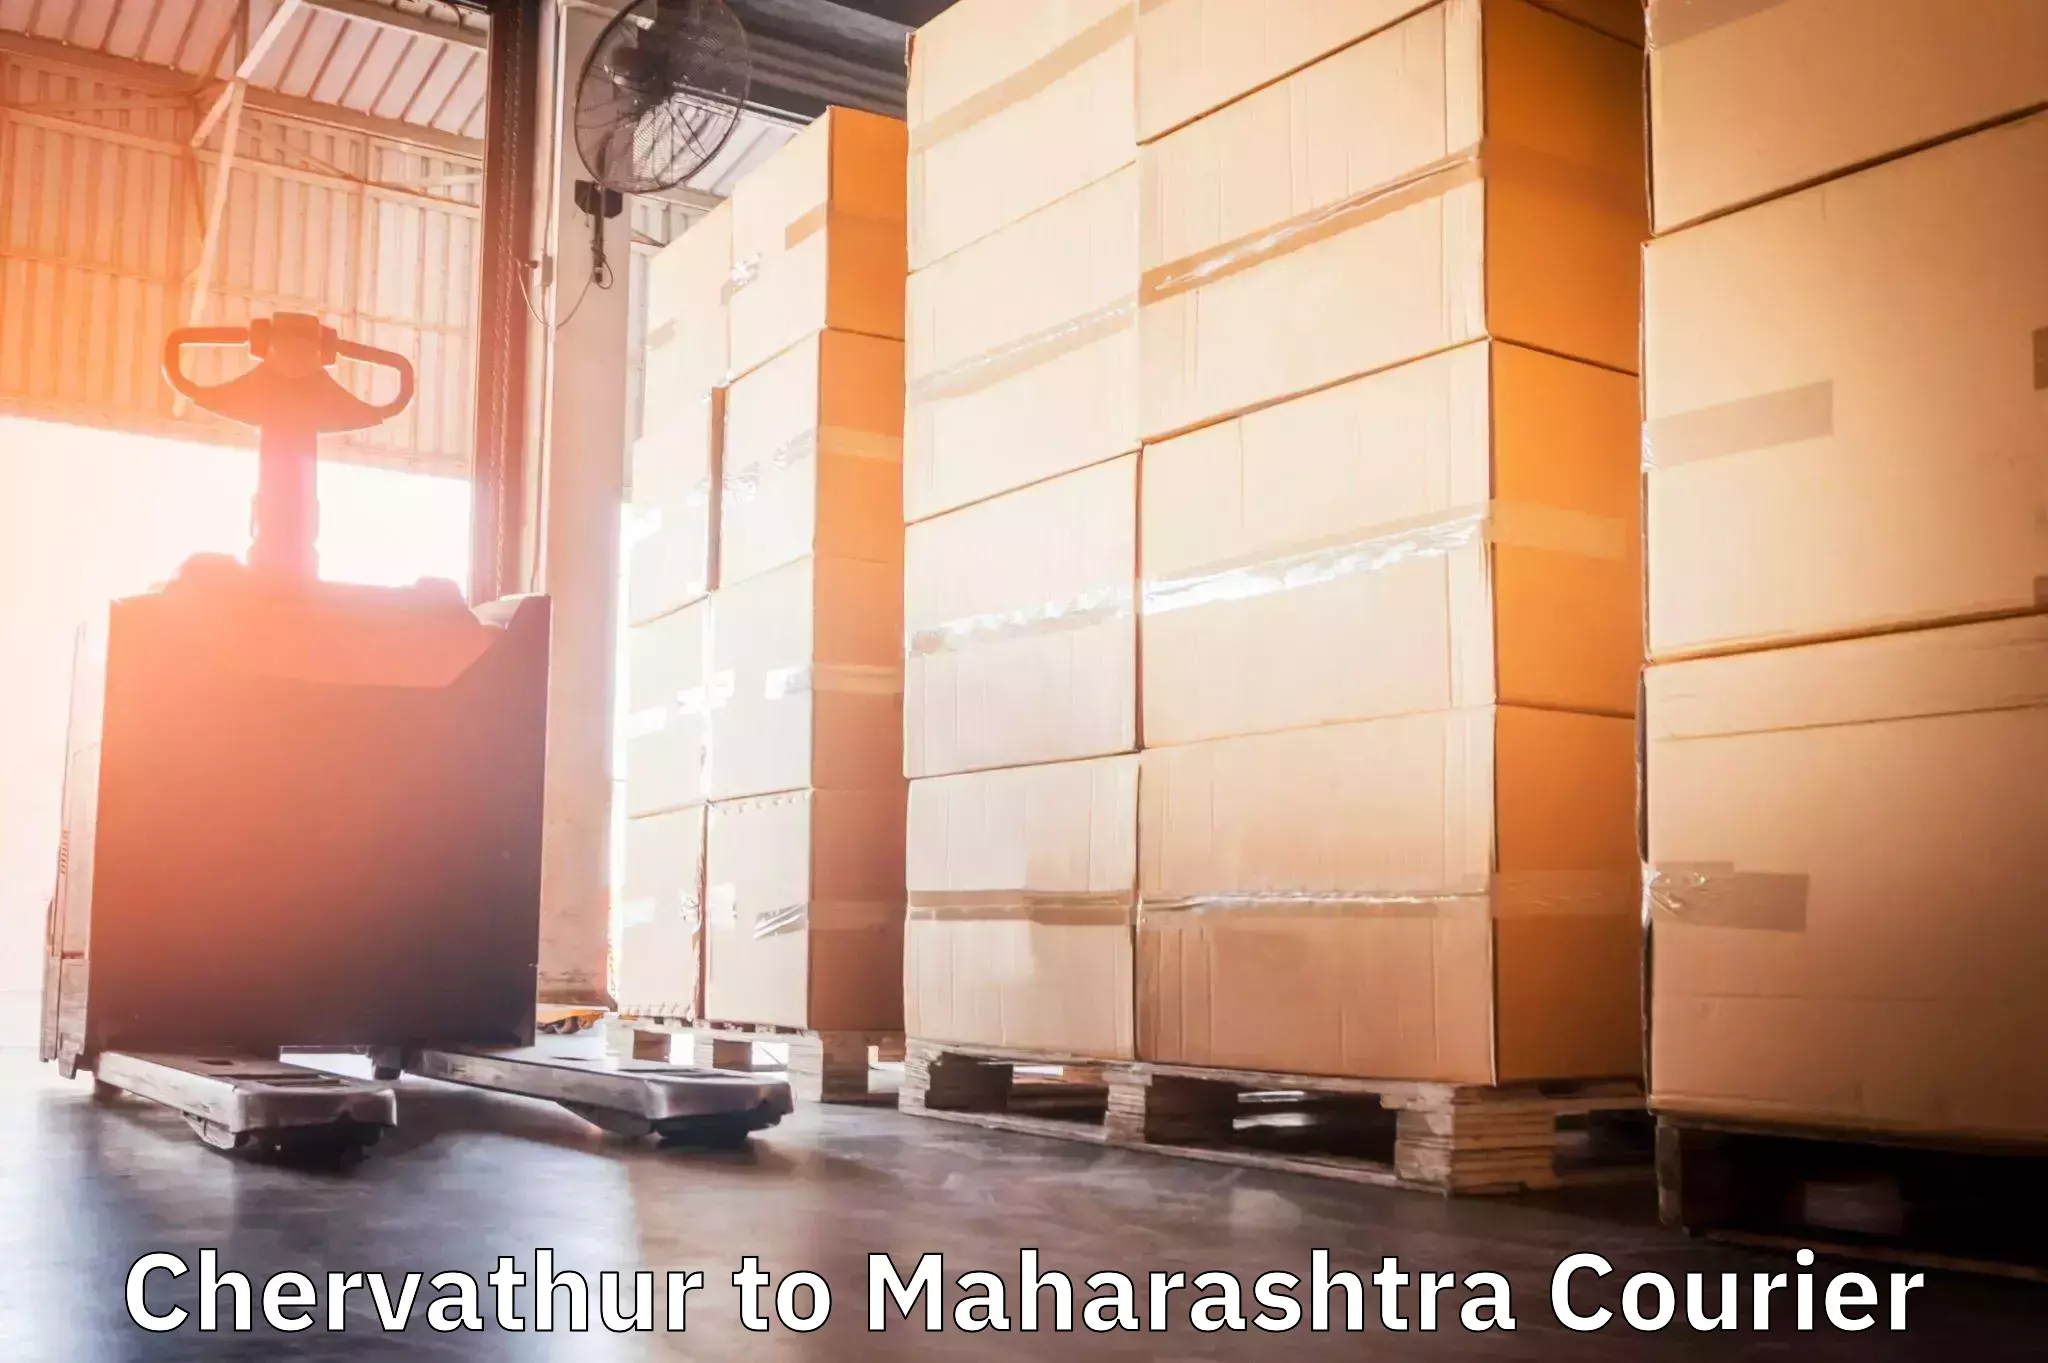 Courier service booking Chervathur to Buldhana